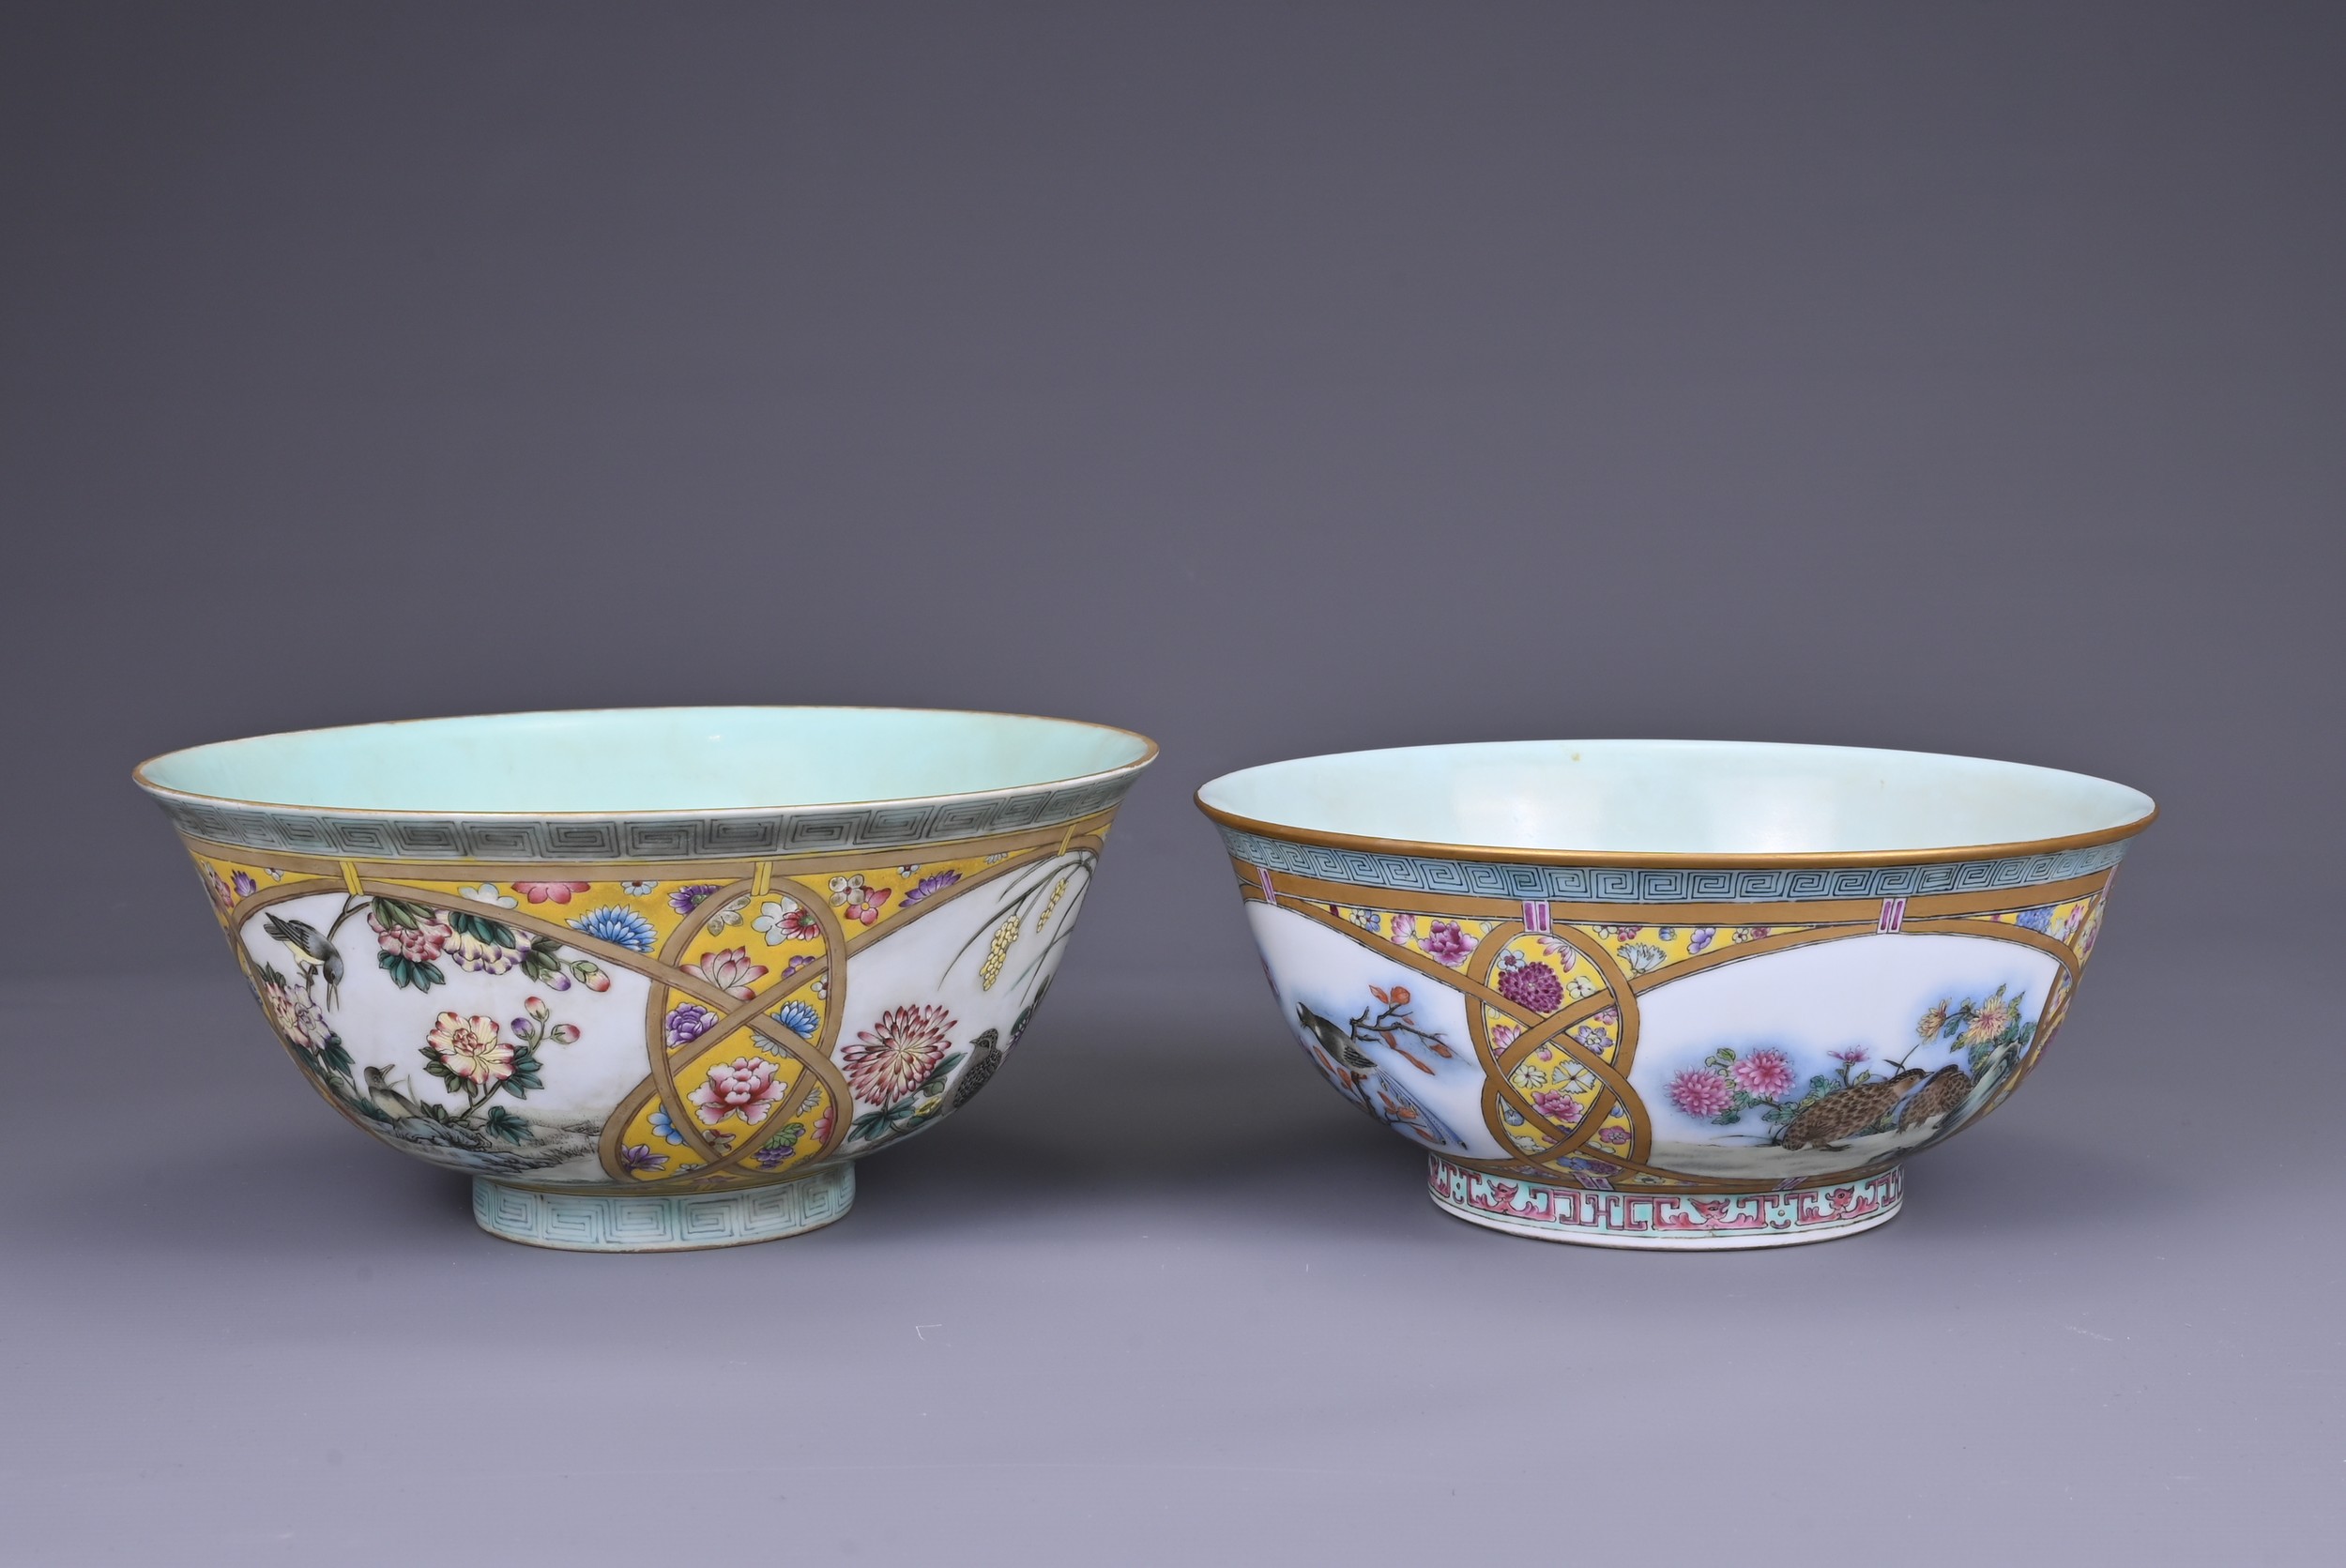 TWO CHINESE FAMILLE ROSE ENAMELLED YELLOW GROUND BOWLS, 20TH CENTURY. One with enamelled four